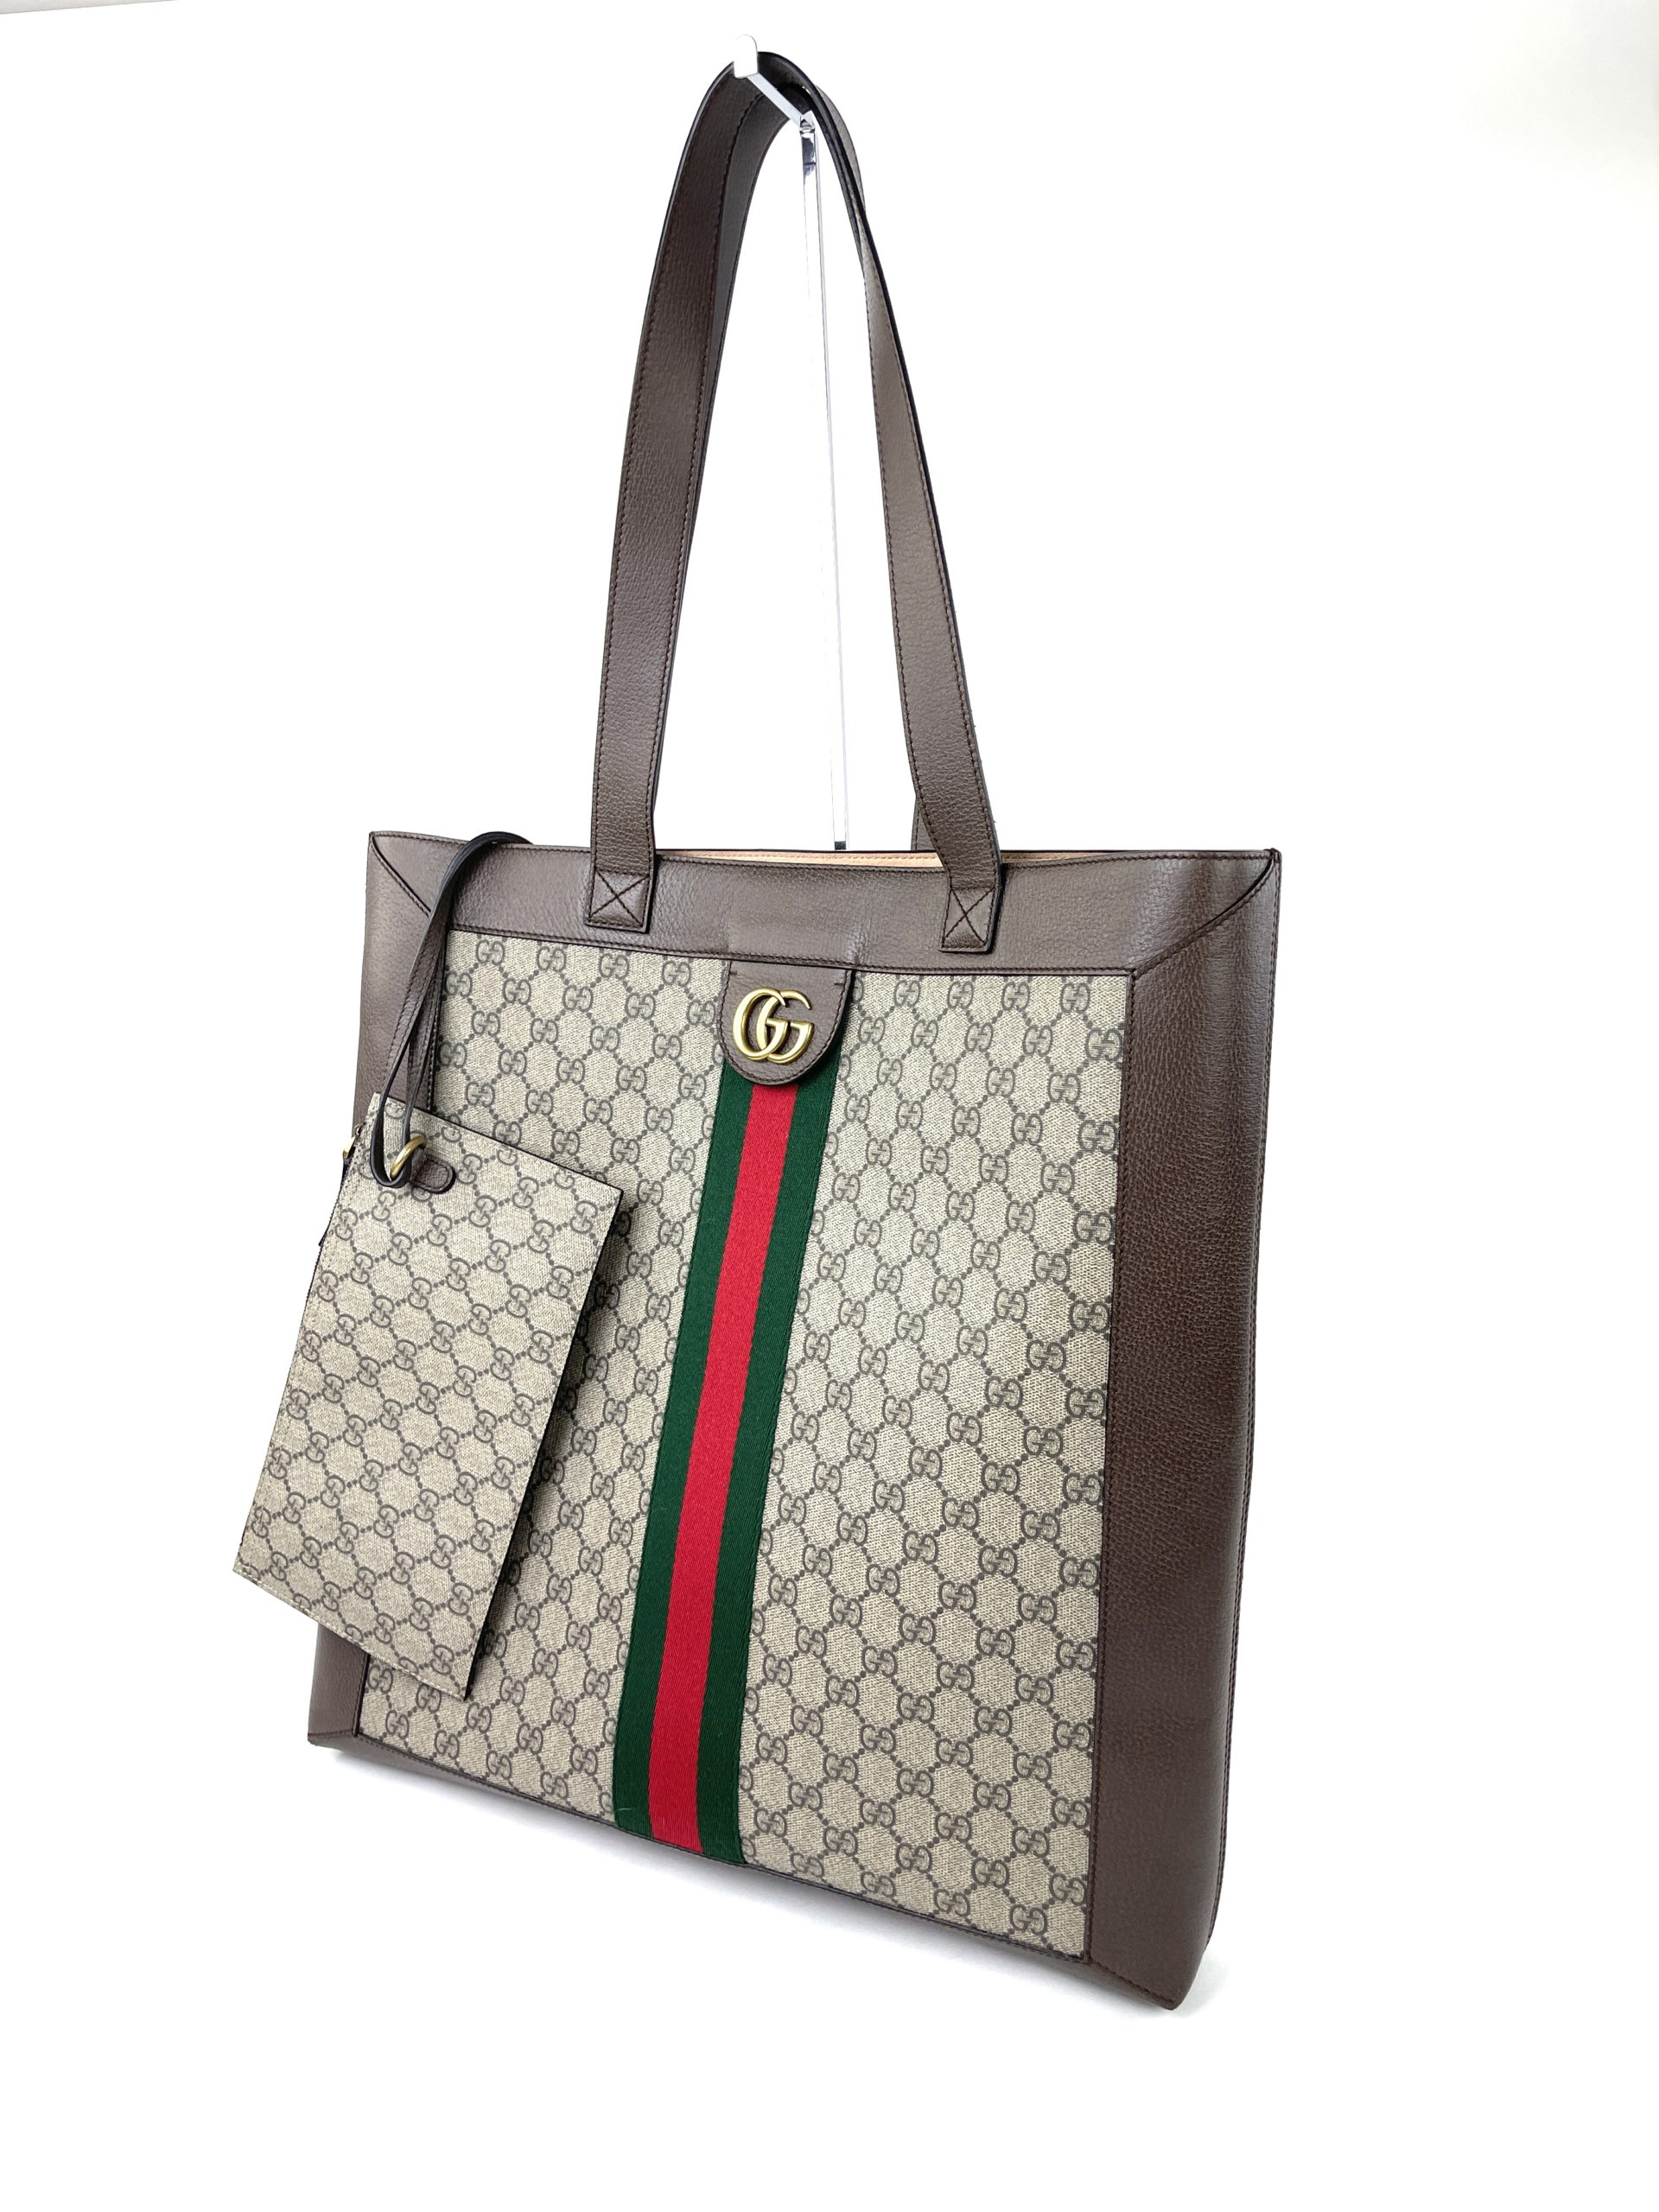 GUCCI Ophidia leather-trimmed printed coated-canvas tote bag